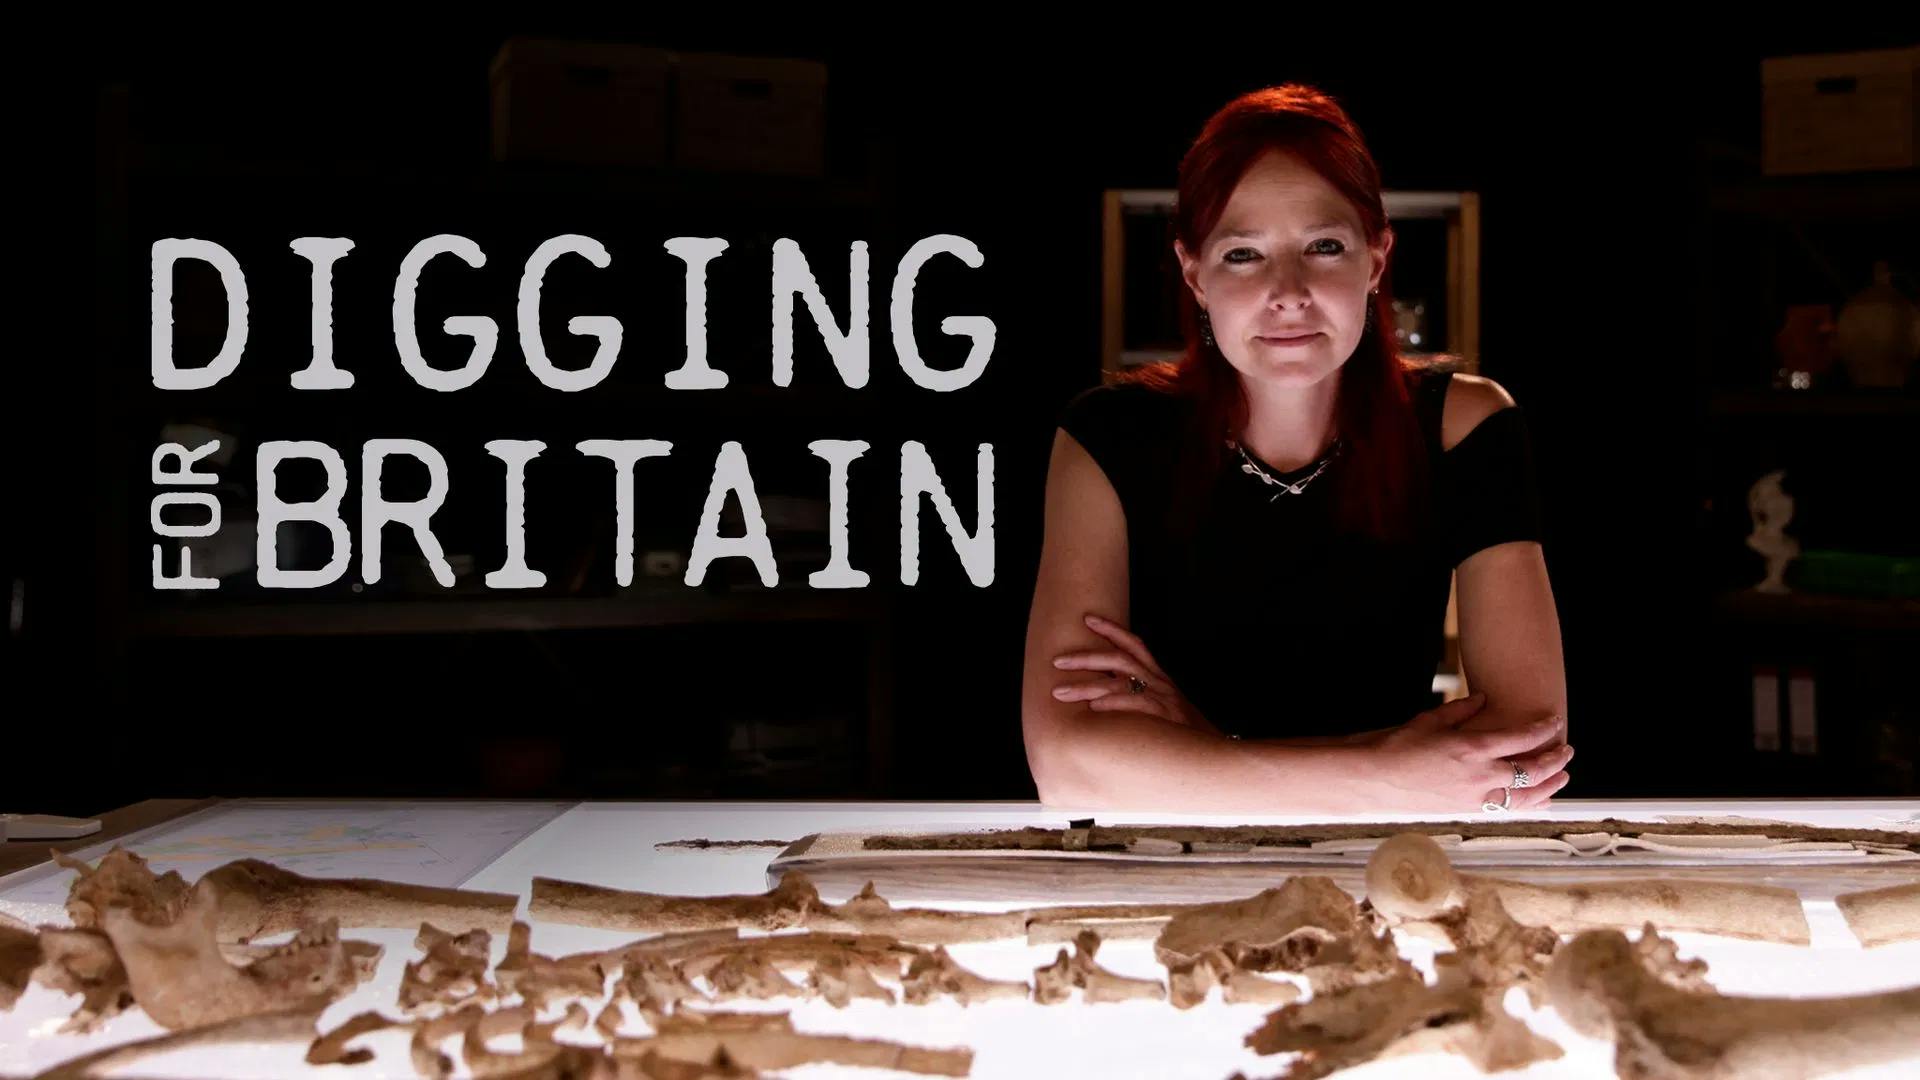 Digging For Britain